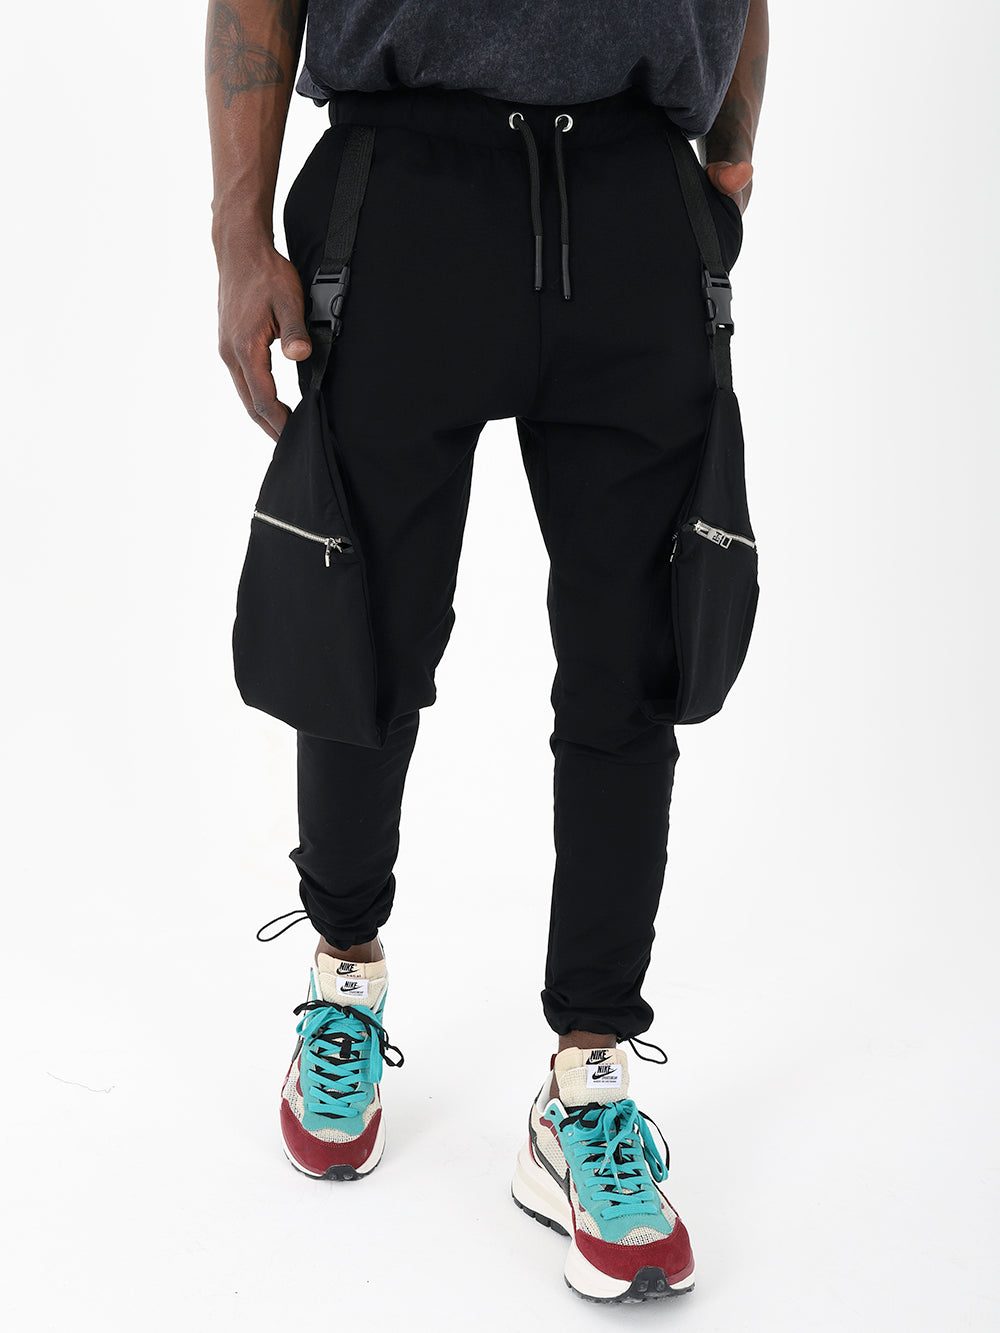 A stylish man in comfortable black Galaxy jogger pants and sneakers.